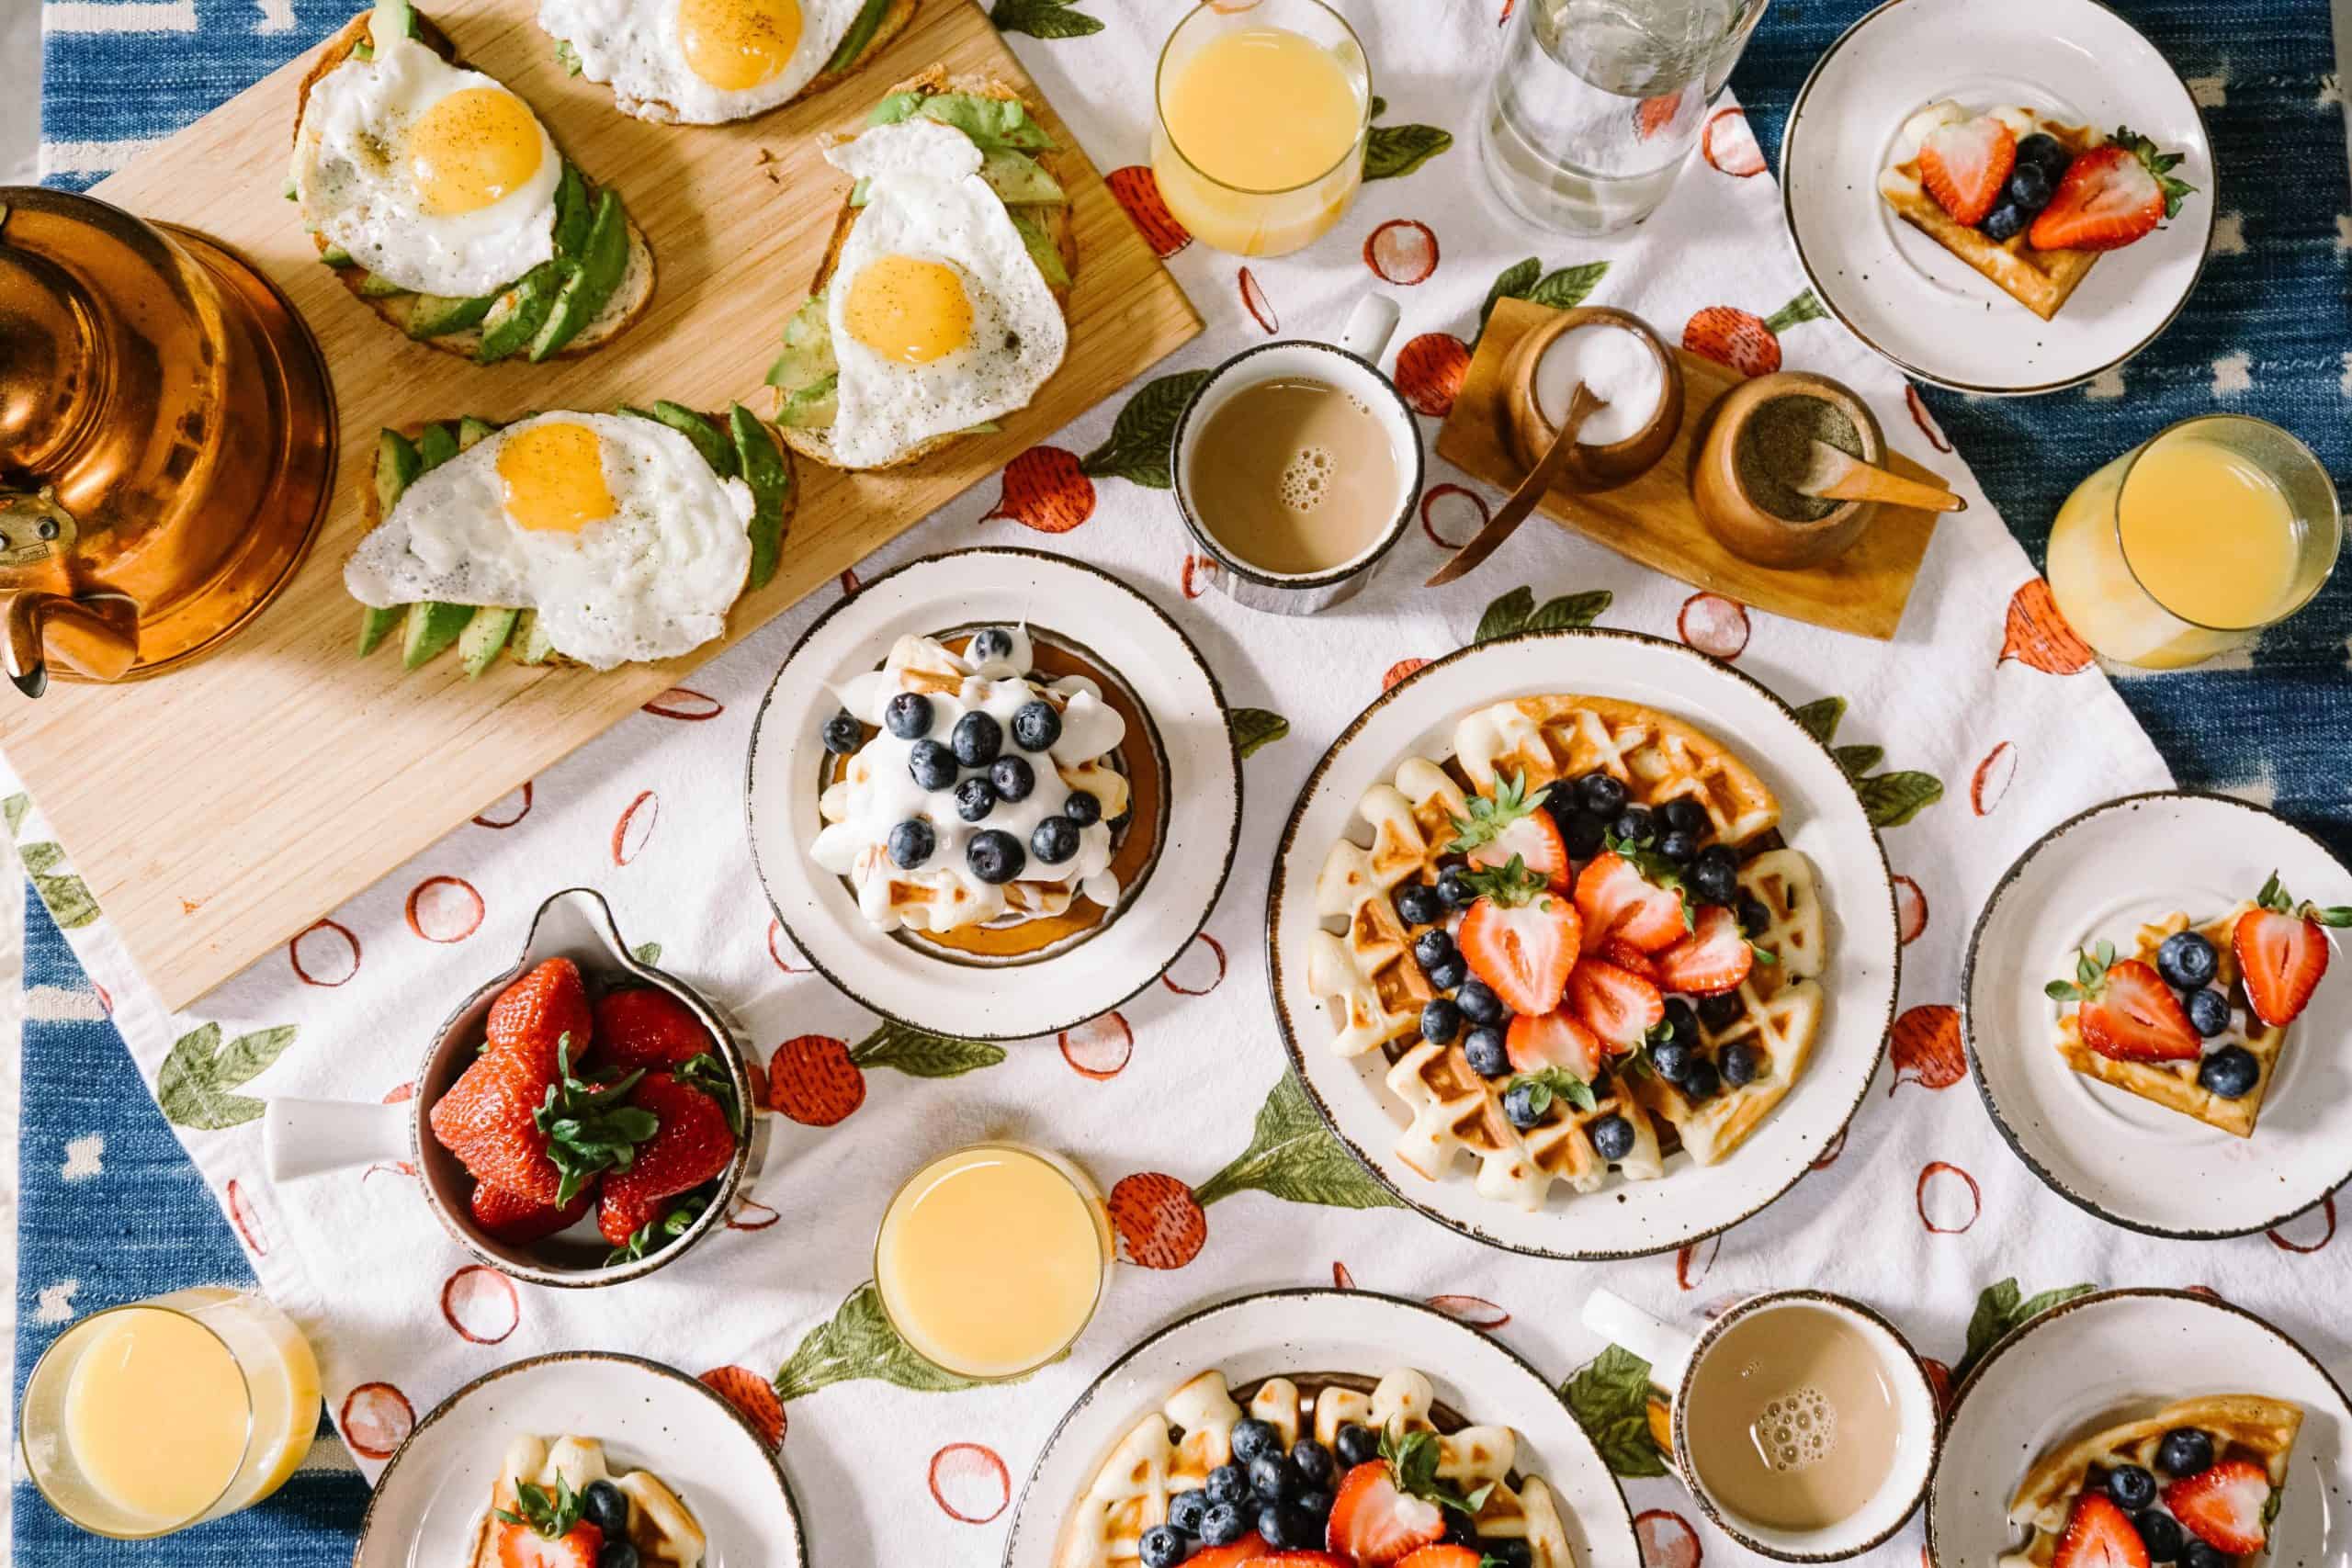 A table set with multiple breakfast food items